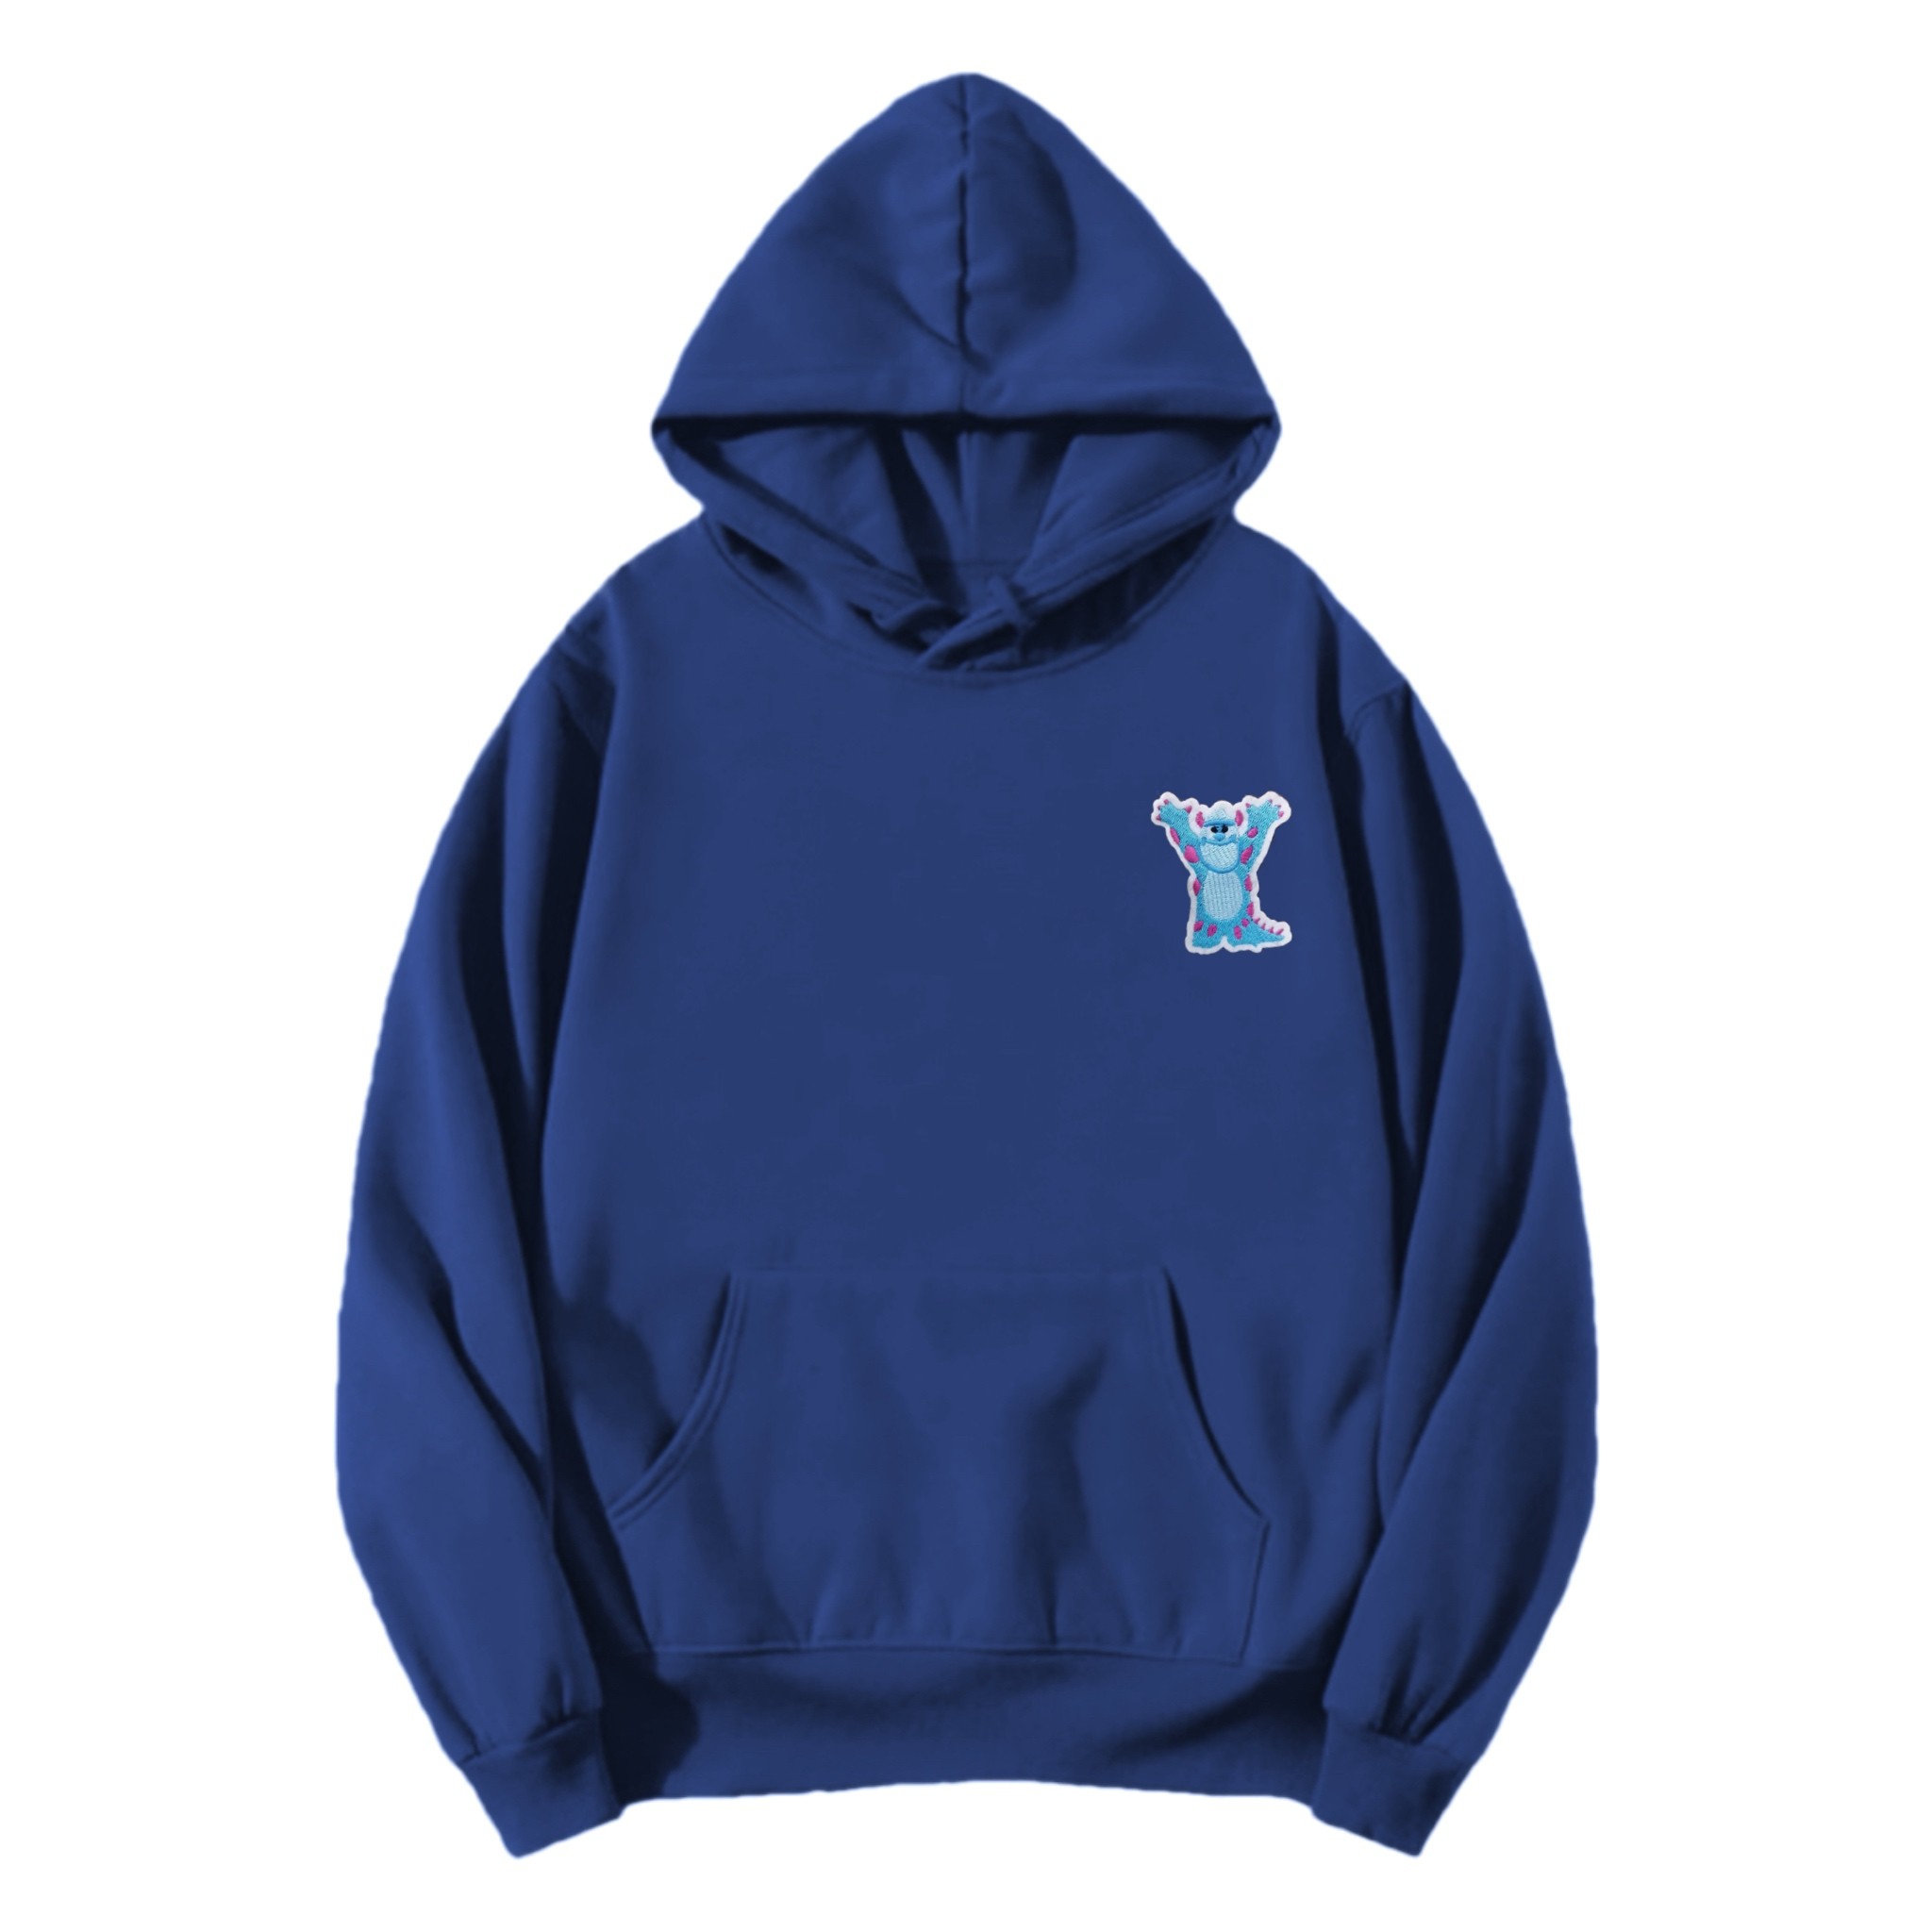 SULLY patched regular fit navy hoodie 